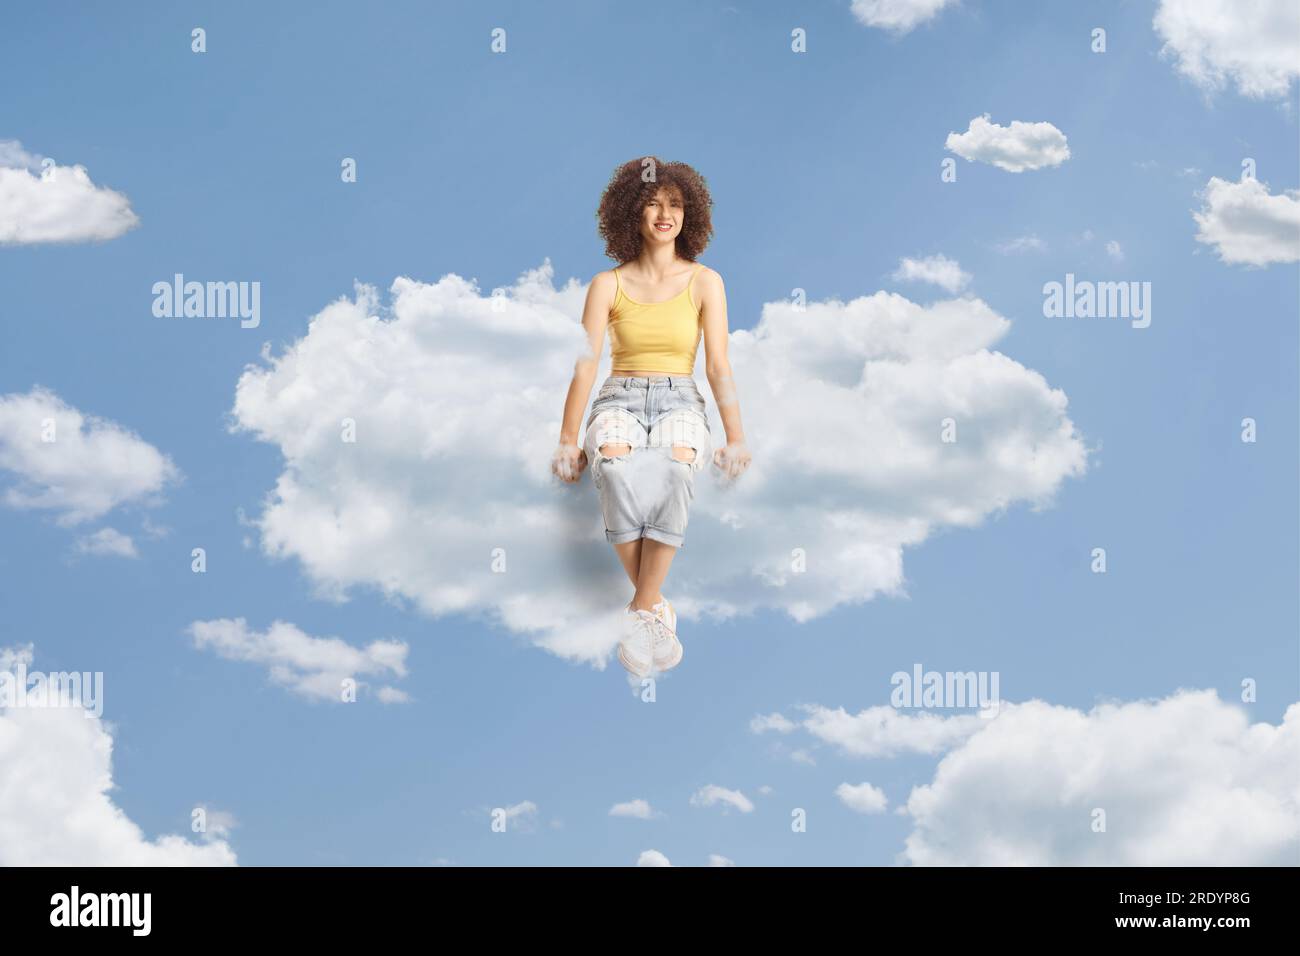 Full length portrait of a young caucasian female with afro hairstyle sitting on a cloud Stock Photo